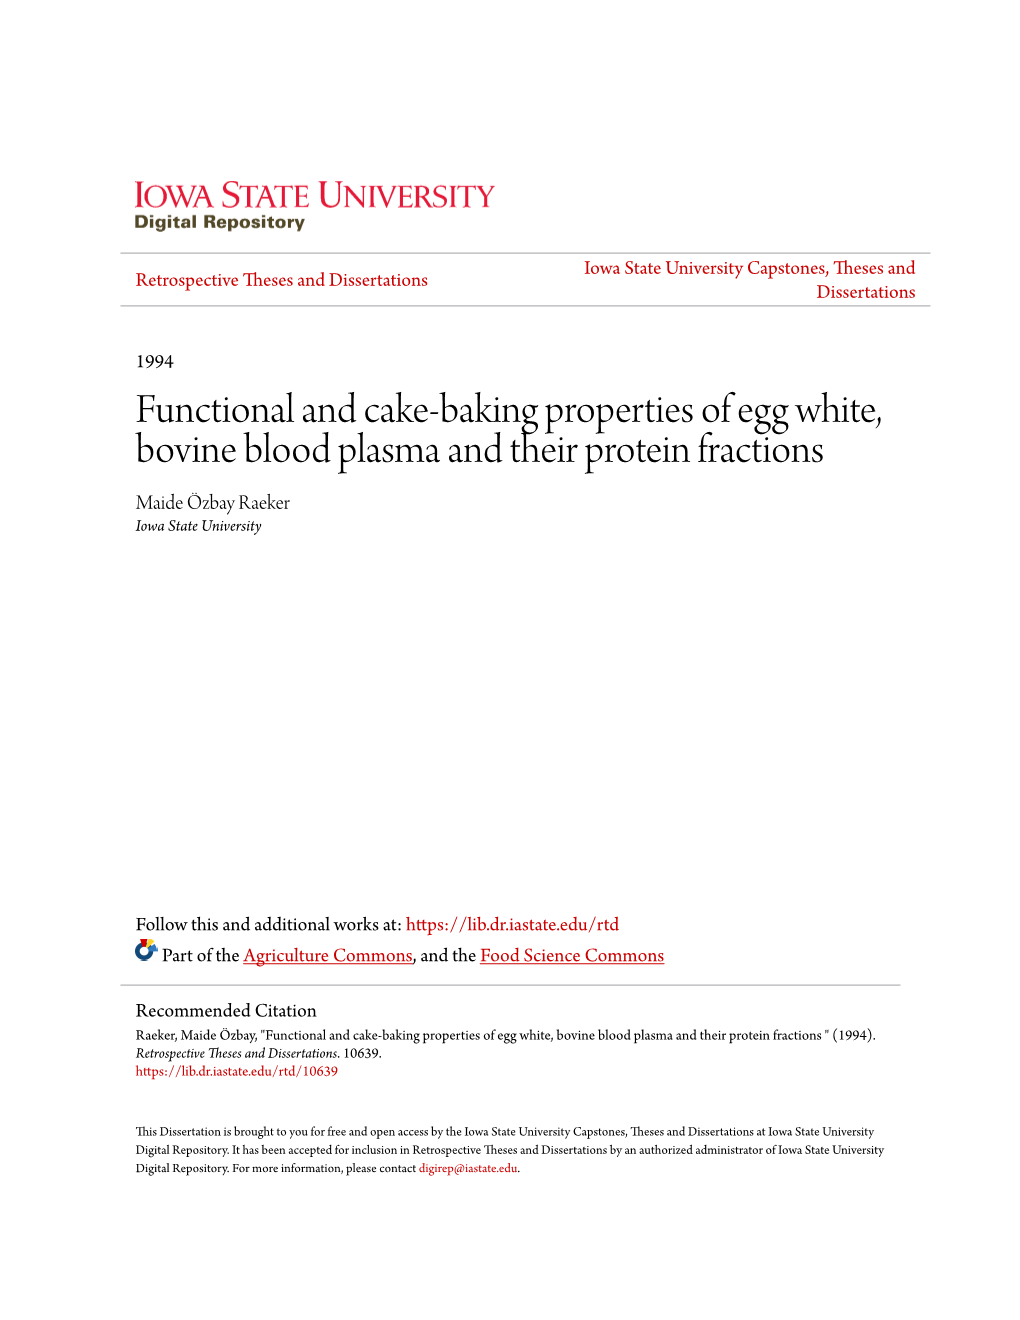 Functional and Cake-Baking Properties of Egg White, Bovine Blood Plasma and Their Protein Fractions Maide Özbay Raeker Iowa State University